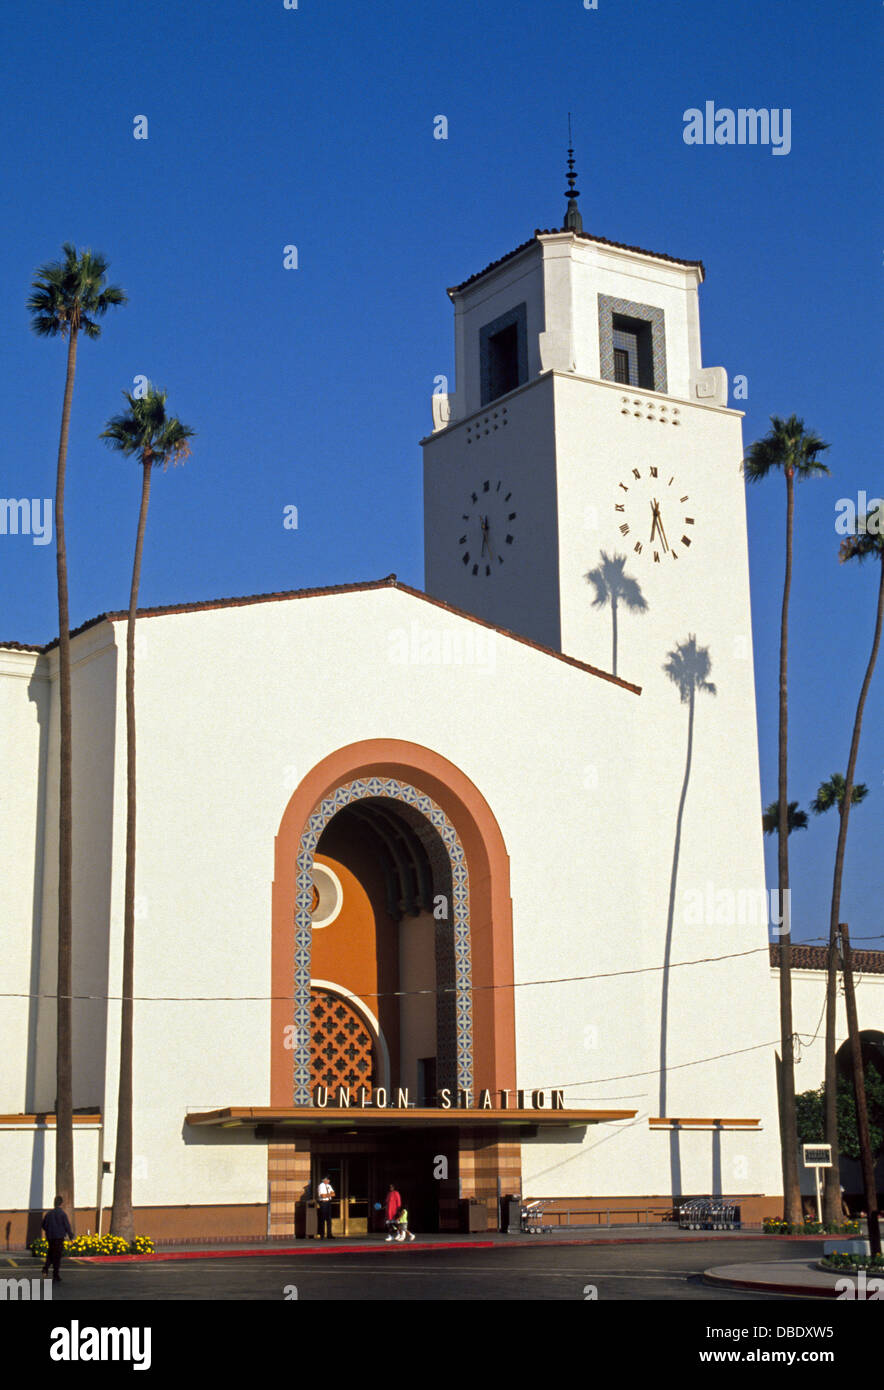 Los Angeles Union Station opened in 1939 and now serves more than 60,000 passengers a day on nationwide, state and local trains in Southern California. Stock Photo